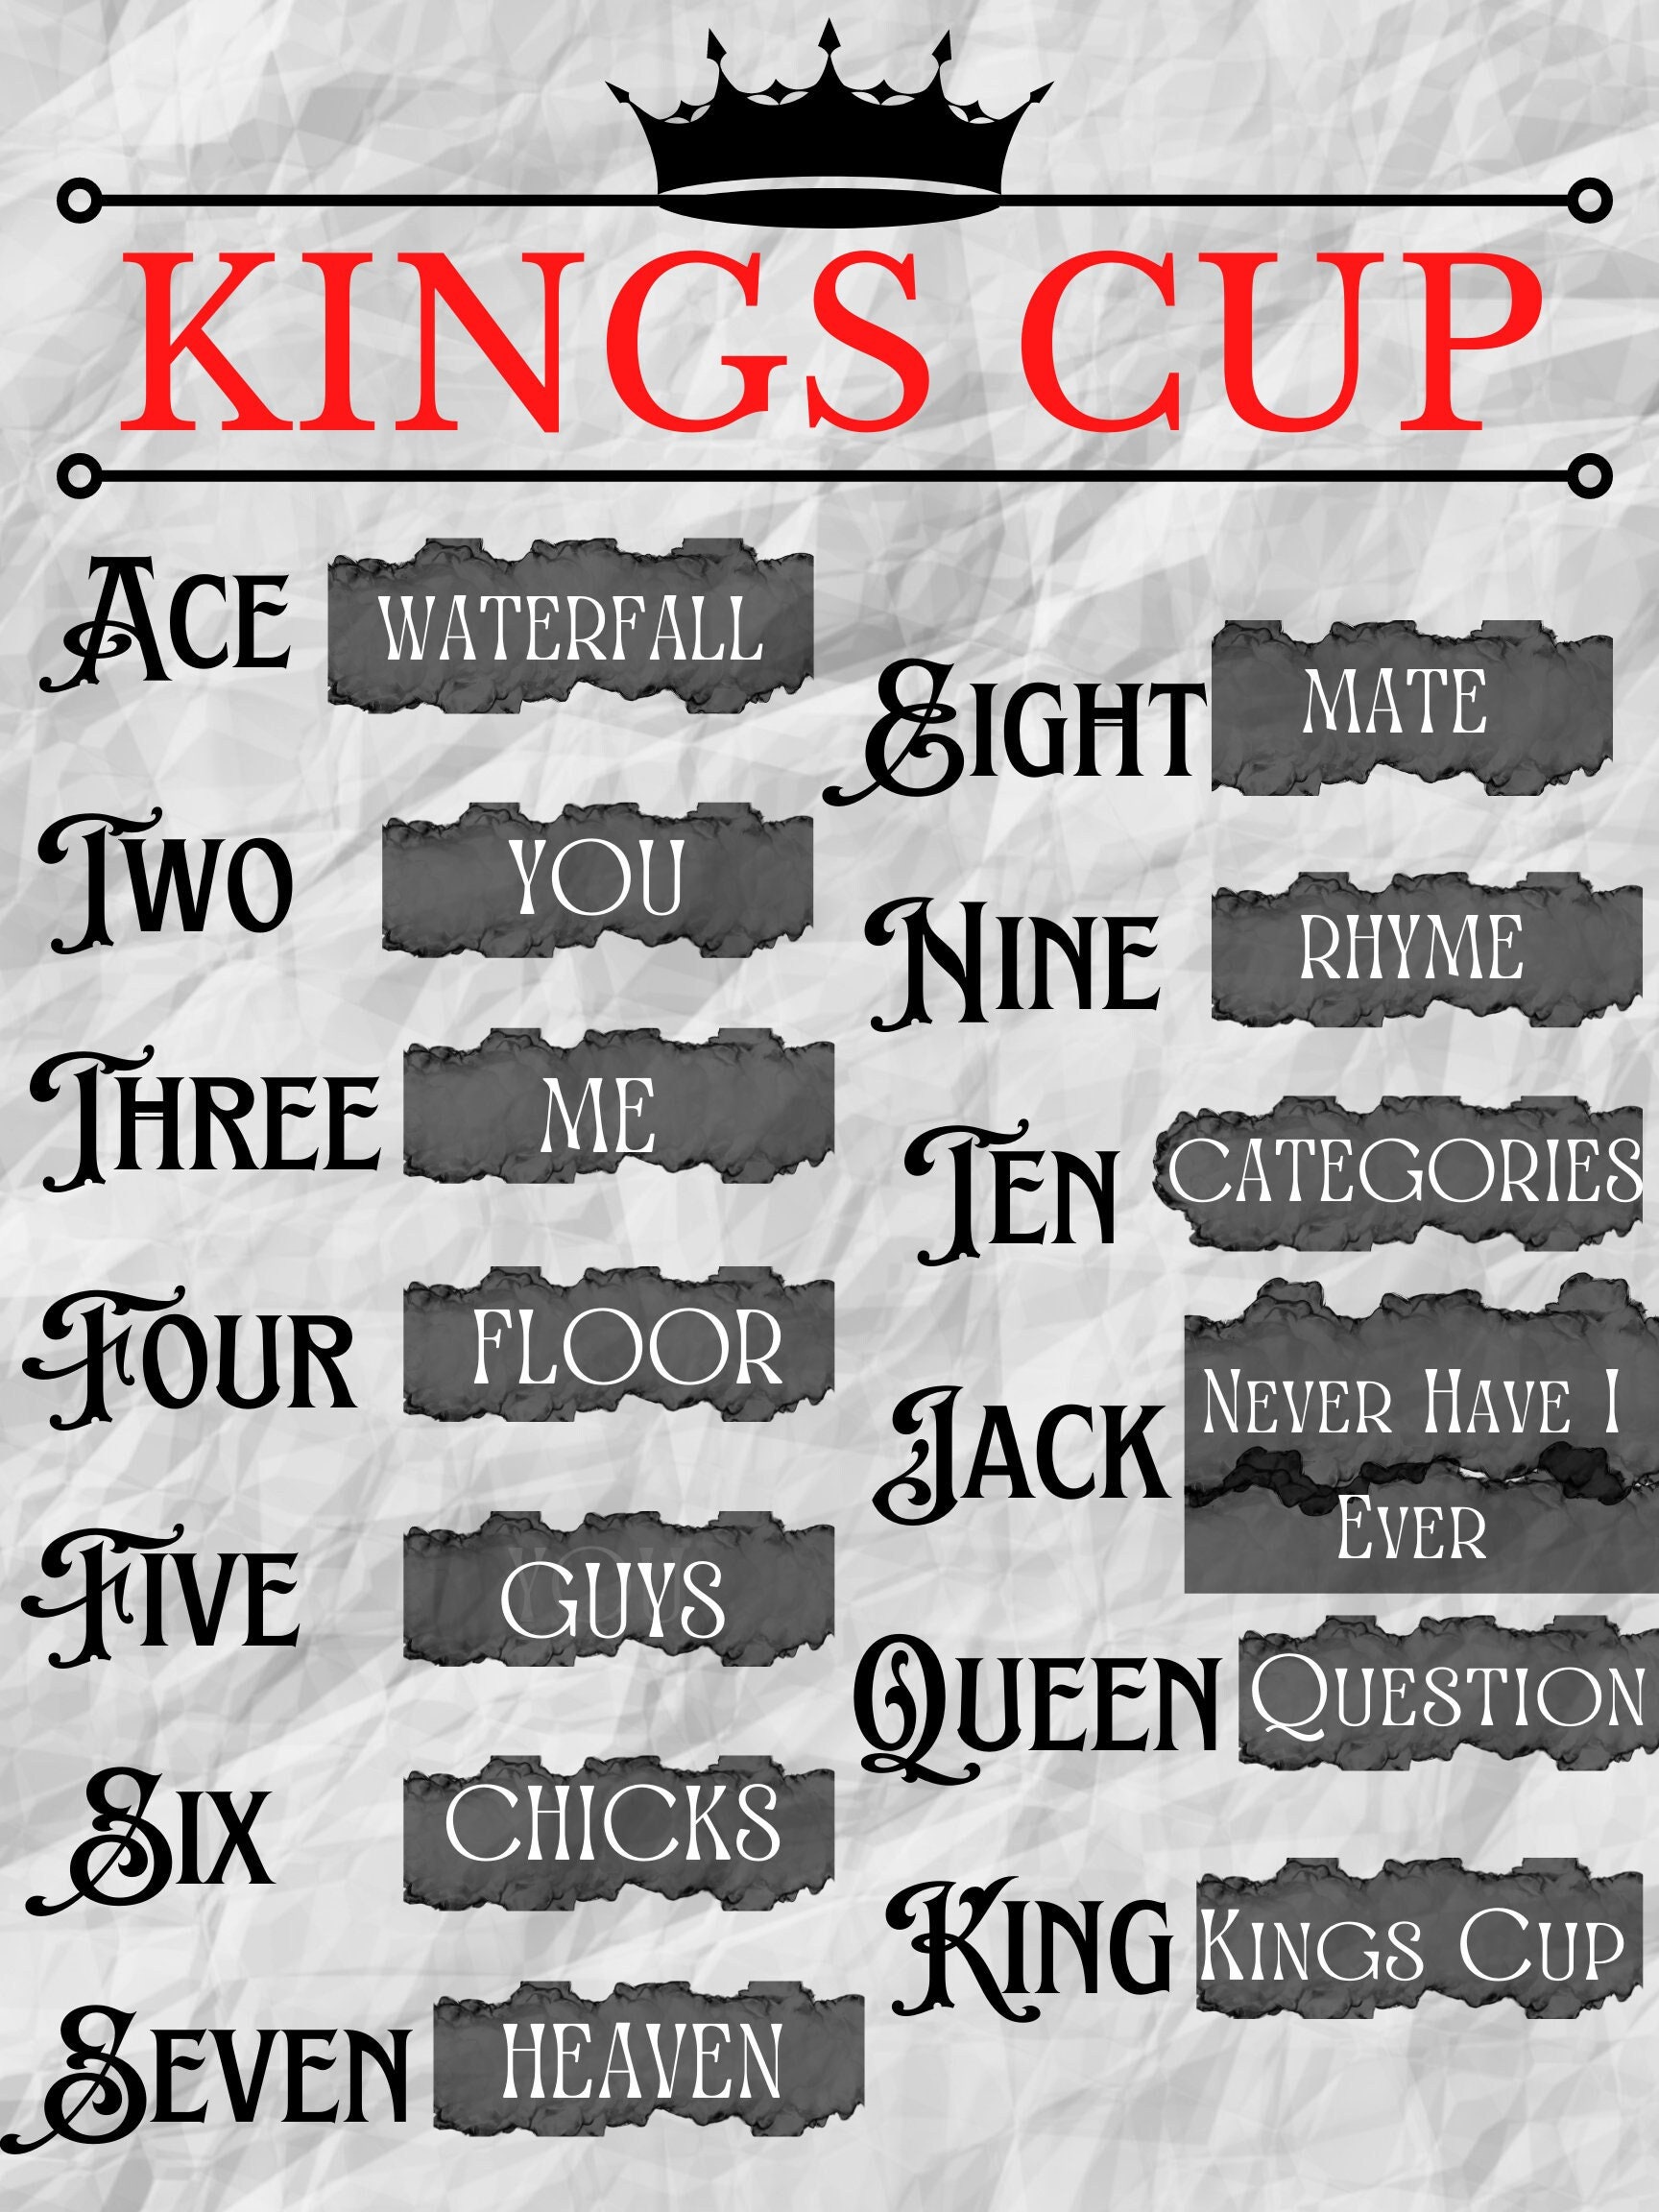  Kings Royale The Party Card Game - A Fun Card Game for Any  College Party, Birthday Parties, Friends Game Night with Waterproof Playing  Cards : Toys & Games